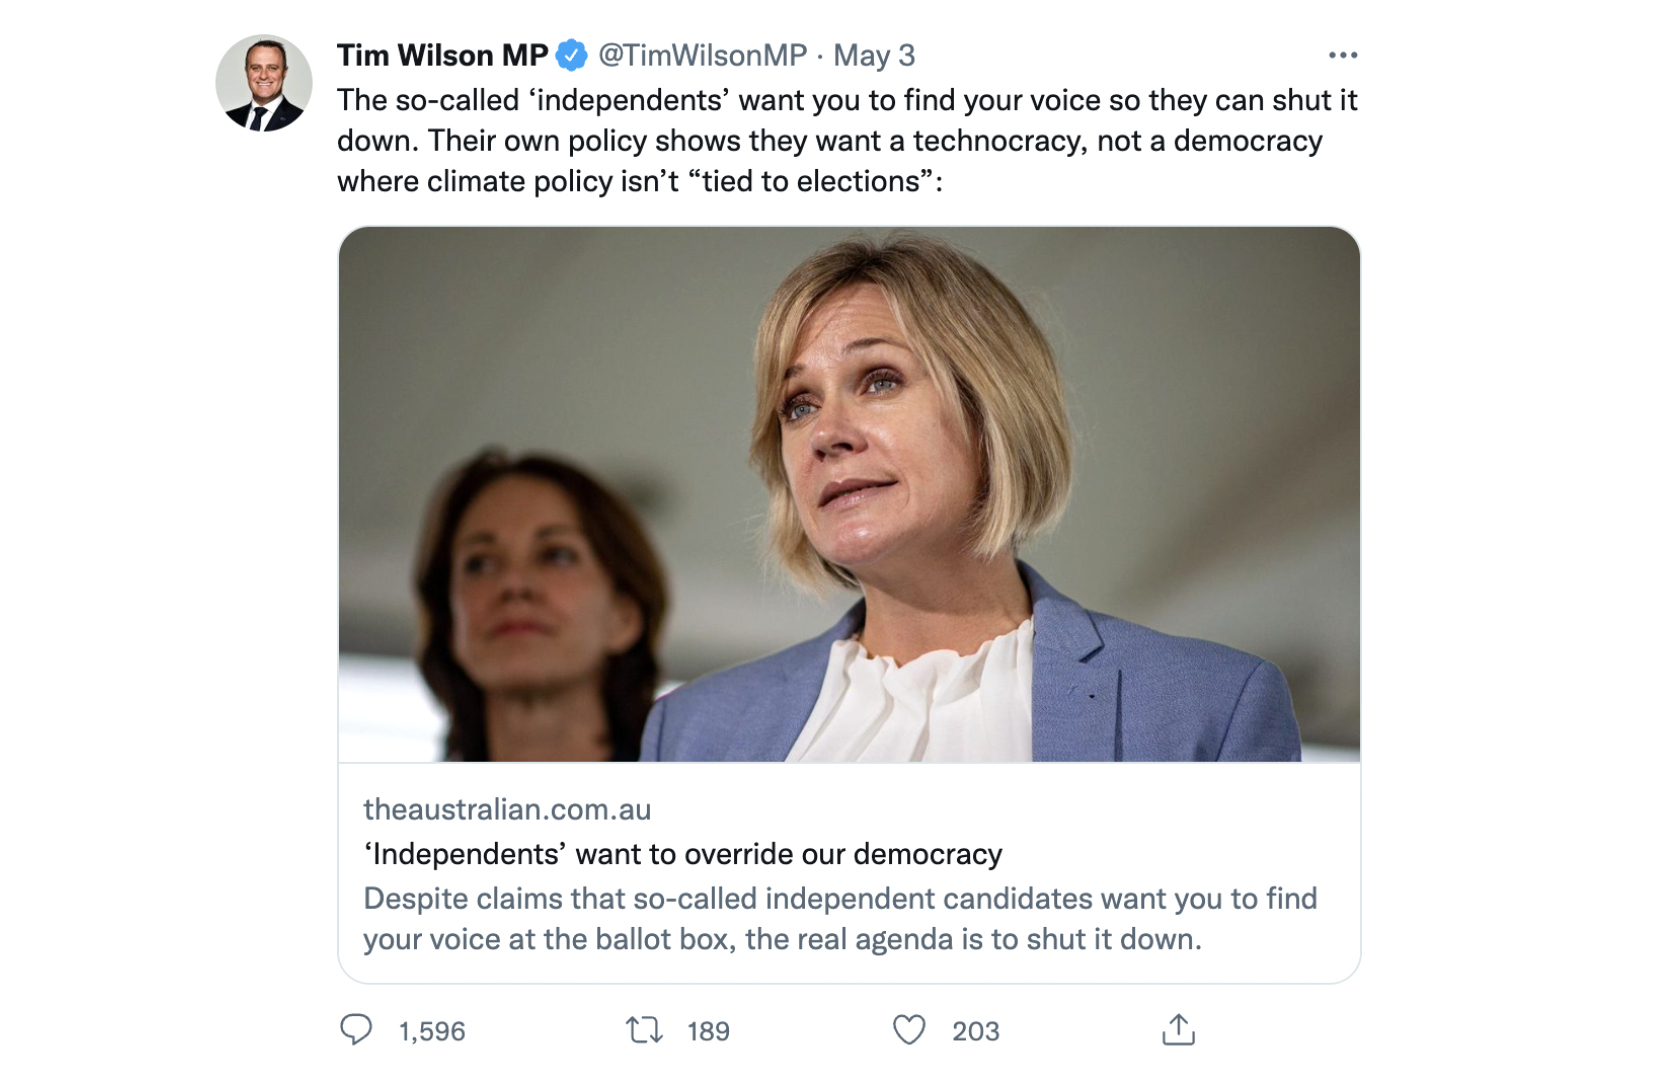 A screenshot of a Twitter post from Tim Wilson's account. It includes a link to image about Zali Steggall, who is pictured.